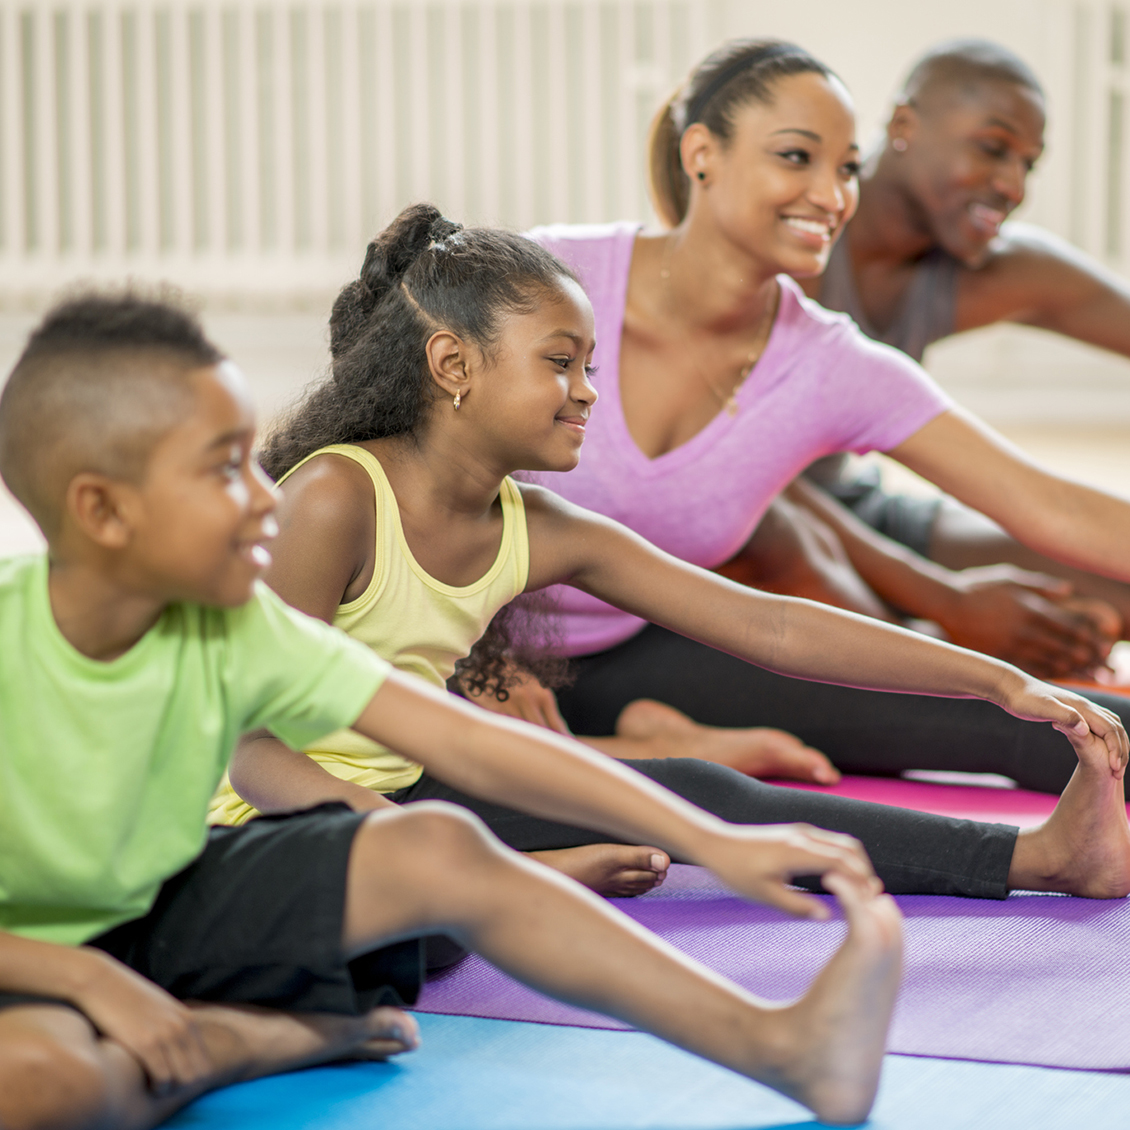 Family participating in yoga